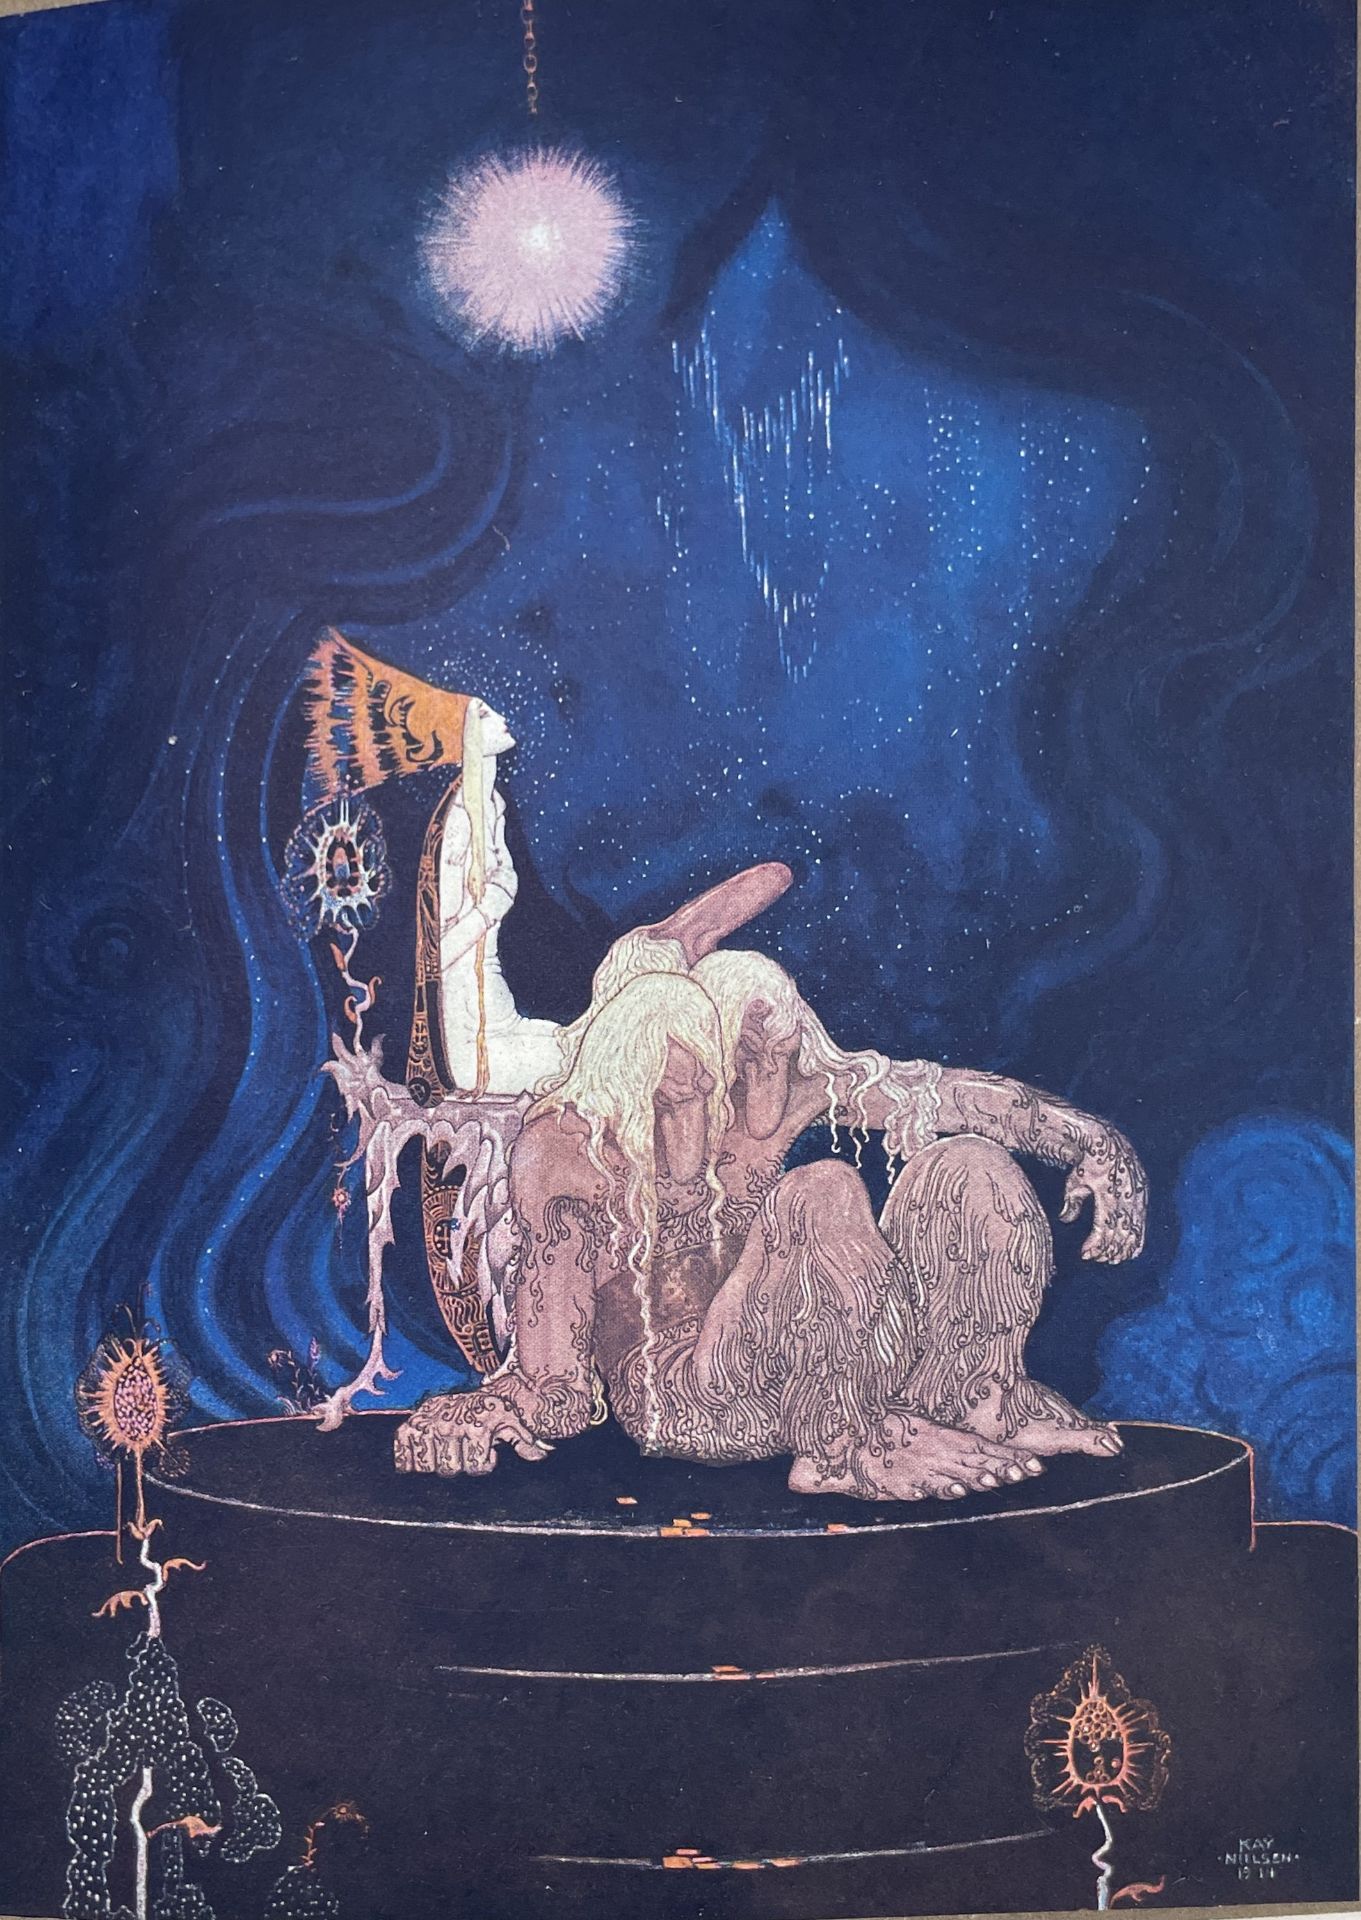 KAY NIELSEN ILLUSTRATIONS. 'East of the Sun and West of the Moon: Old Tales from the North.' - Image 28 of 29